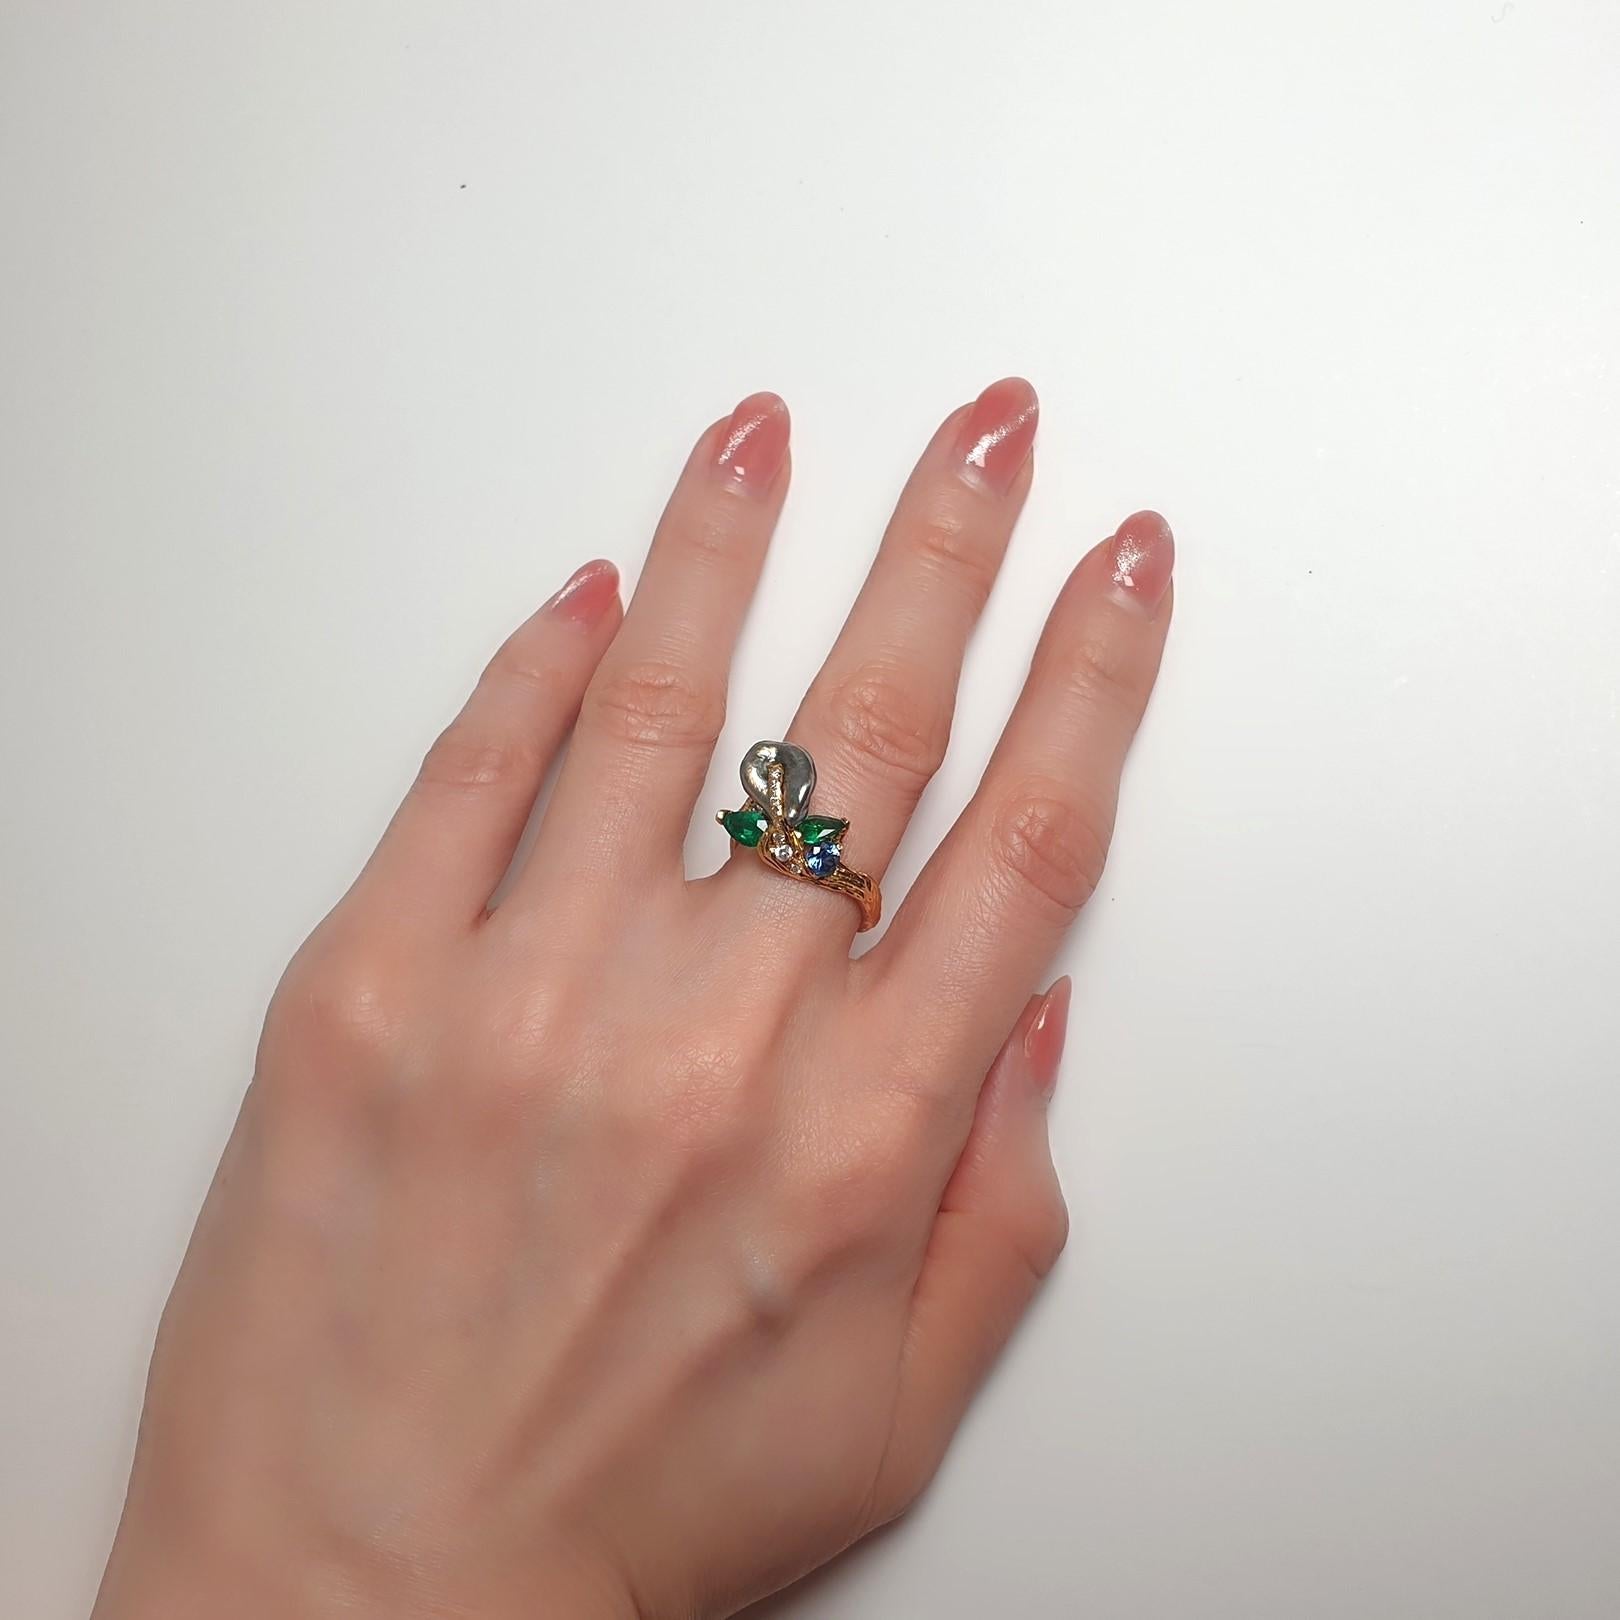 Keshi Pearl Emerald Diamond Handmade ring by Viktor Moiseikin In Excellent Condition For Sale In Hong Kong, HK